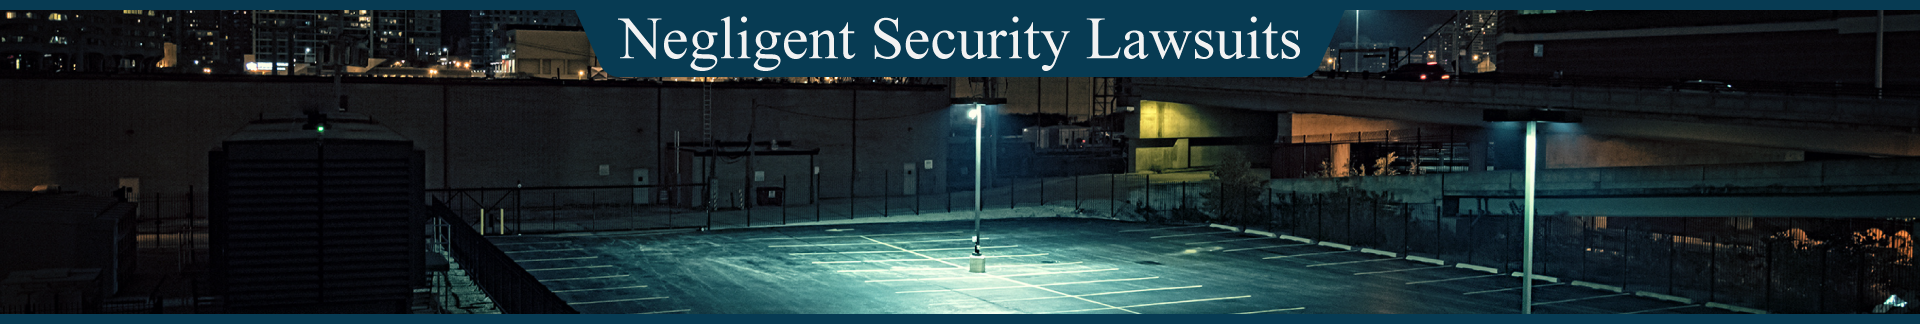 Negligent Security Lawsuit The Peña Law Firm Miami